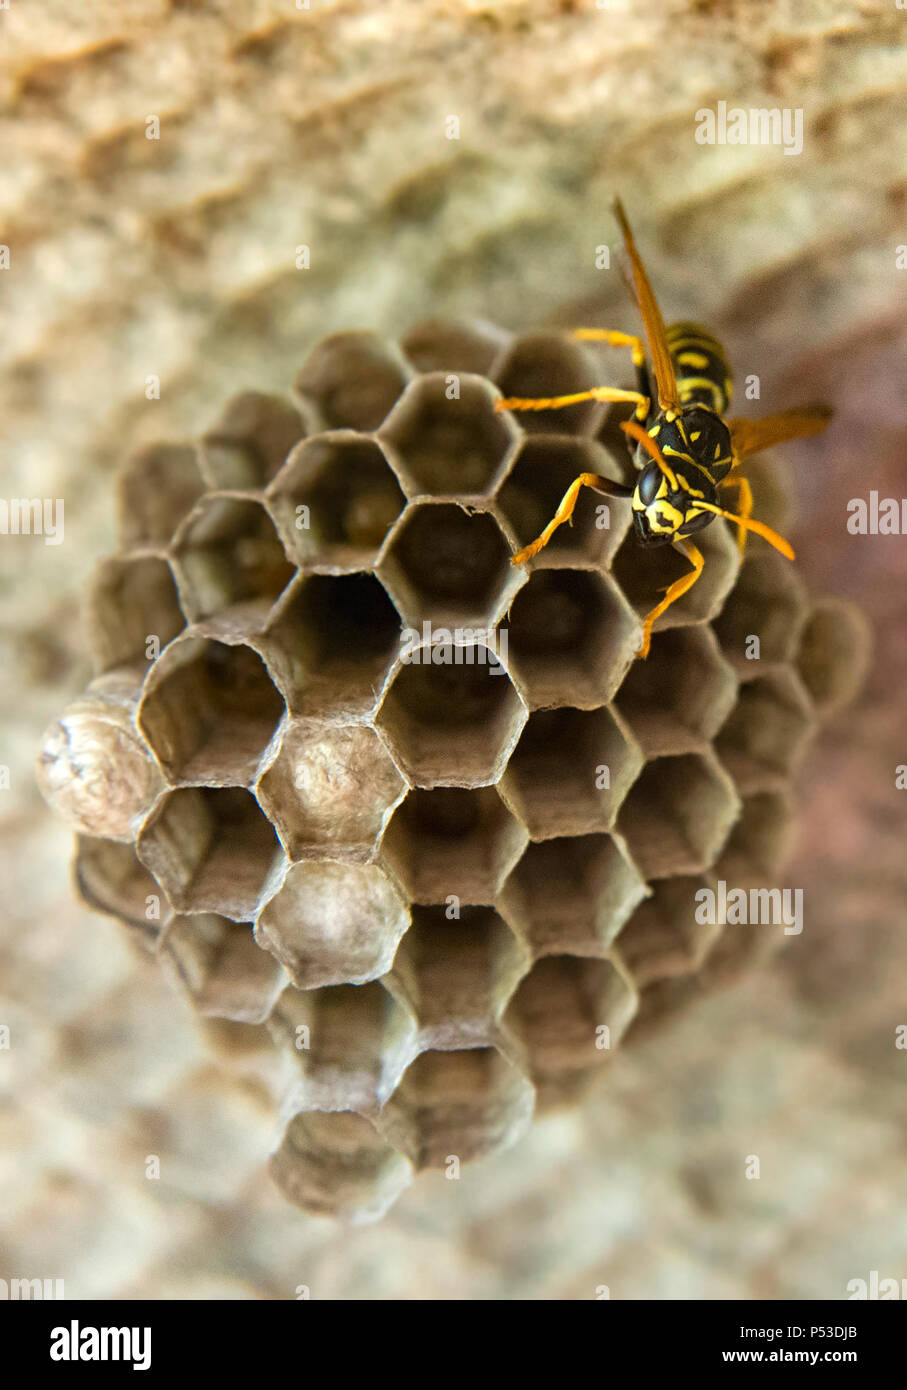 wasp on its nest and building Stock Photo